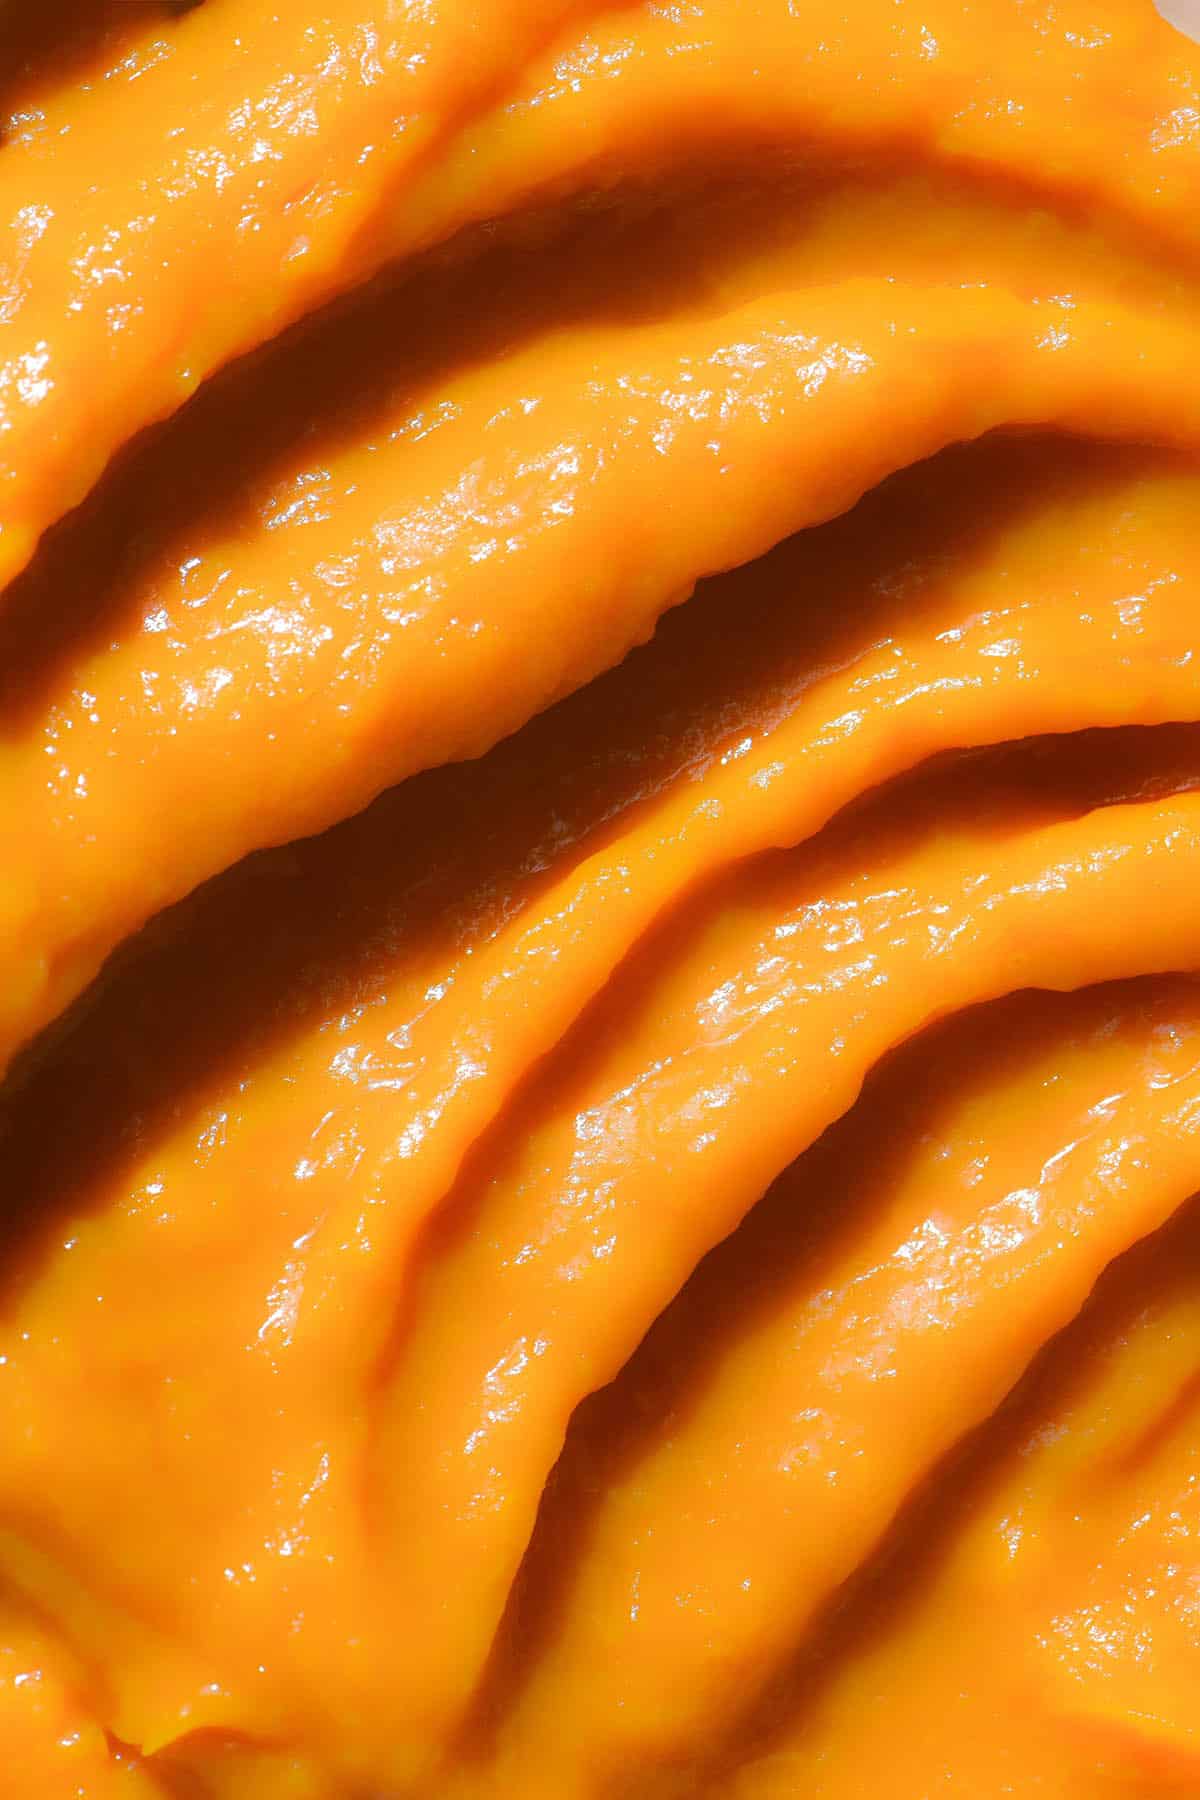 An aerial macro image of a bowl of pumpkin puree arranged in a swirl pattern